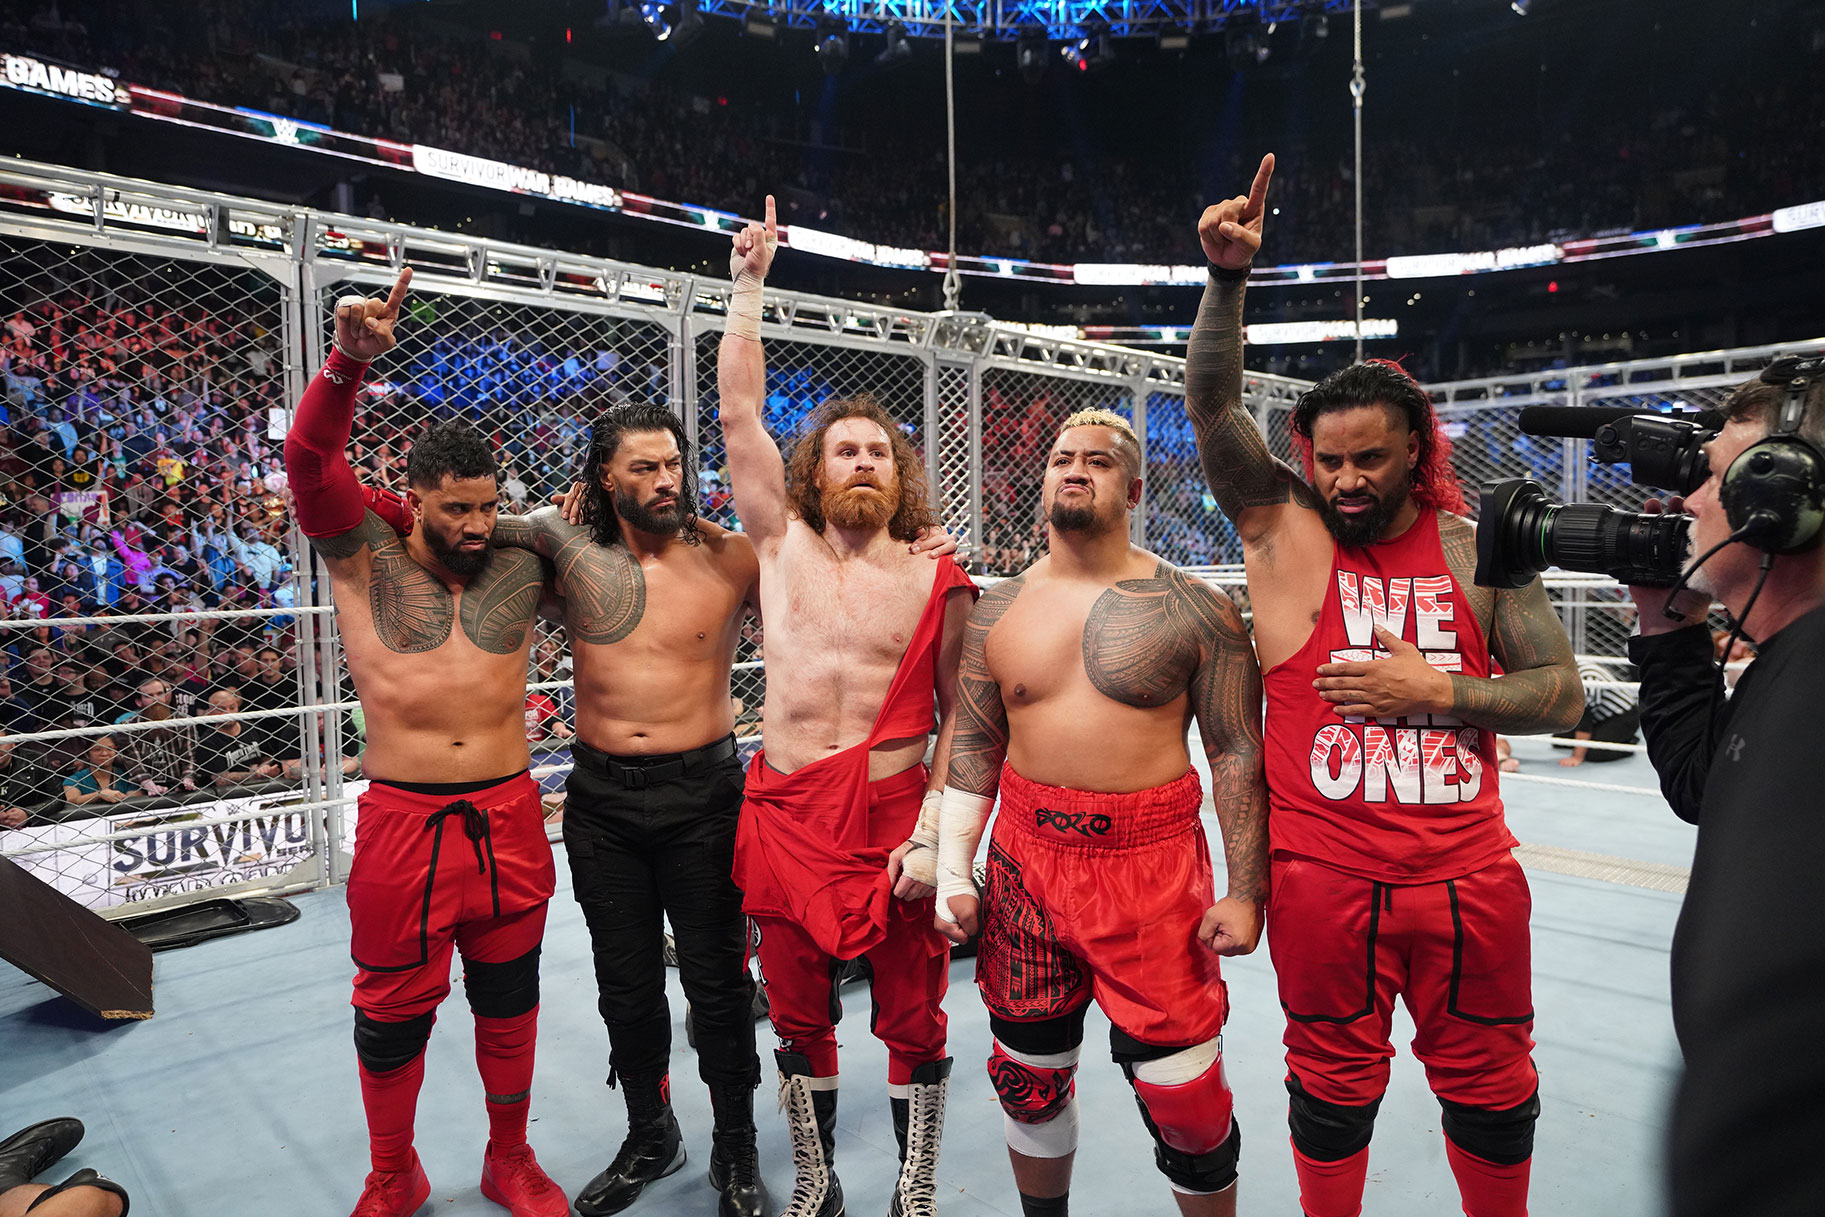 Sami Zayn and The Bloodline in the ring together